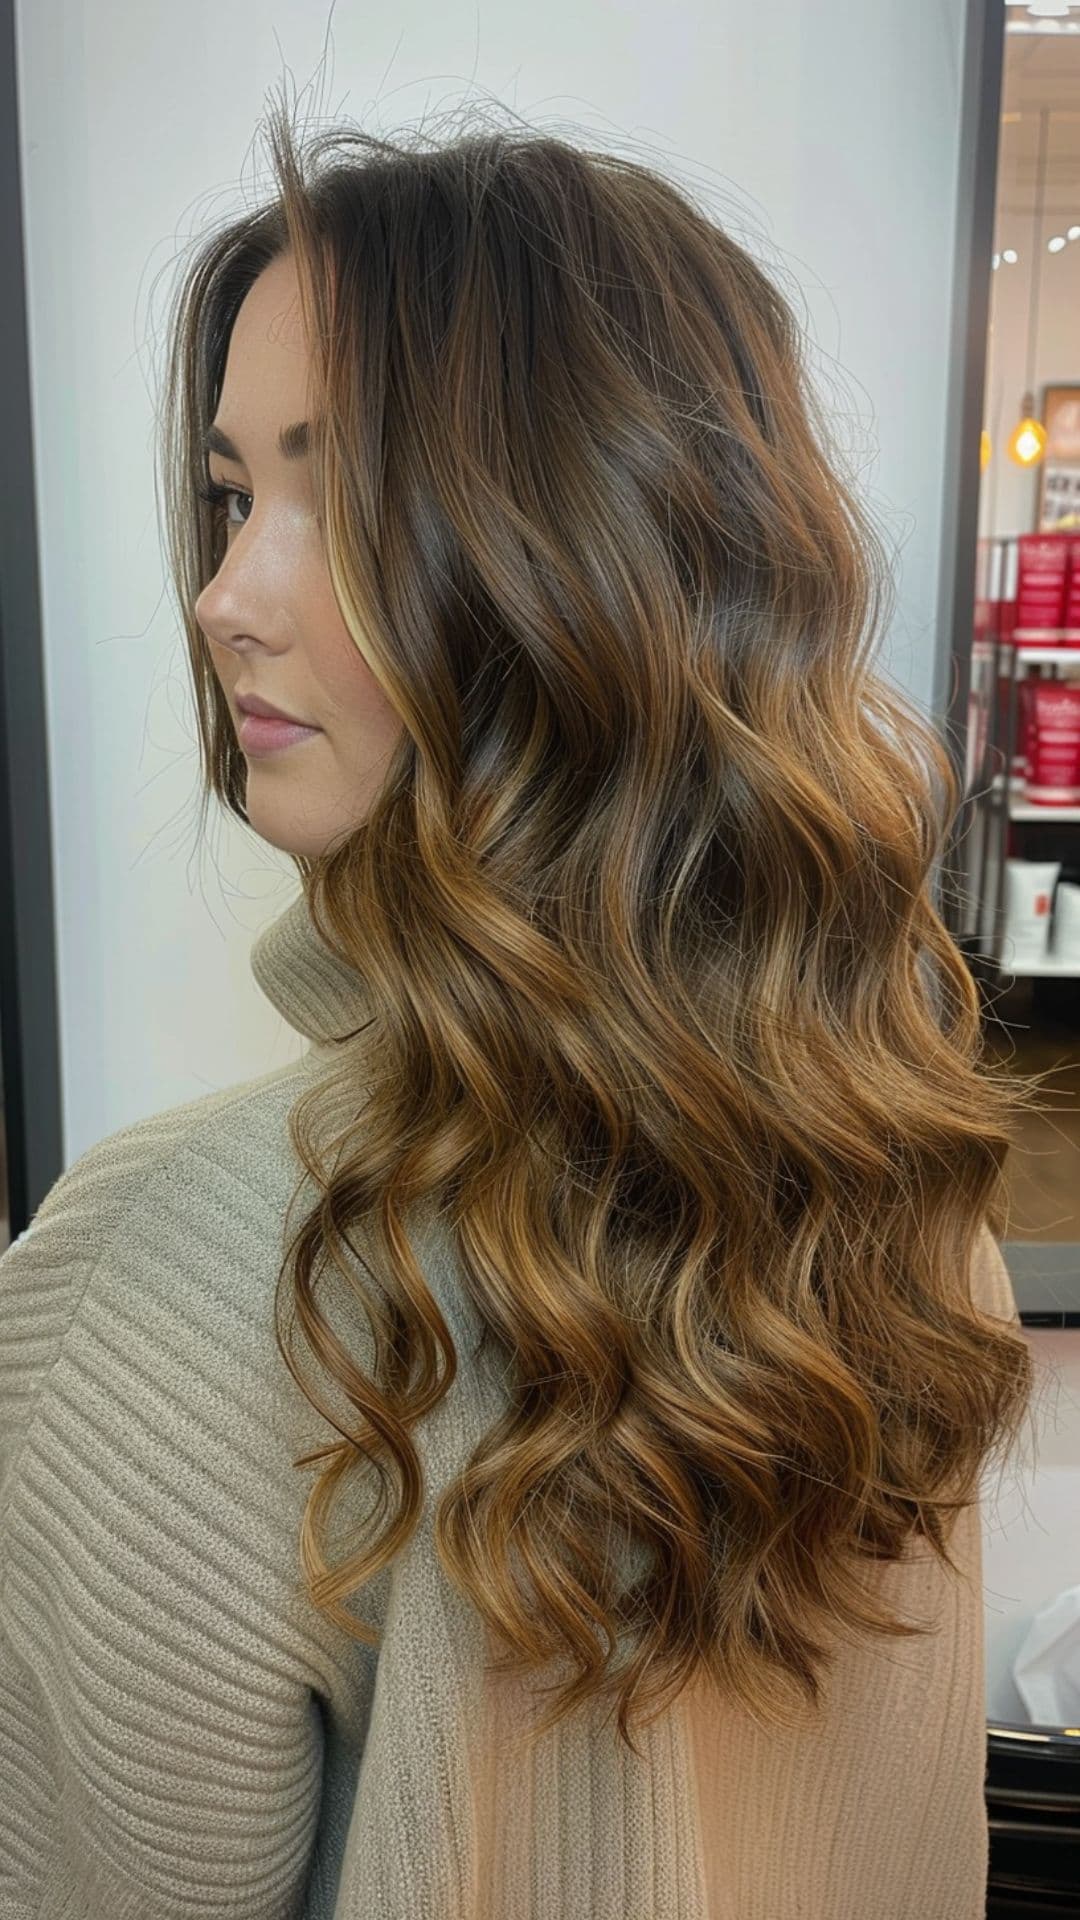 A woman modelling a caramel ombre on brunette hair.